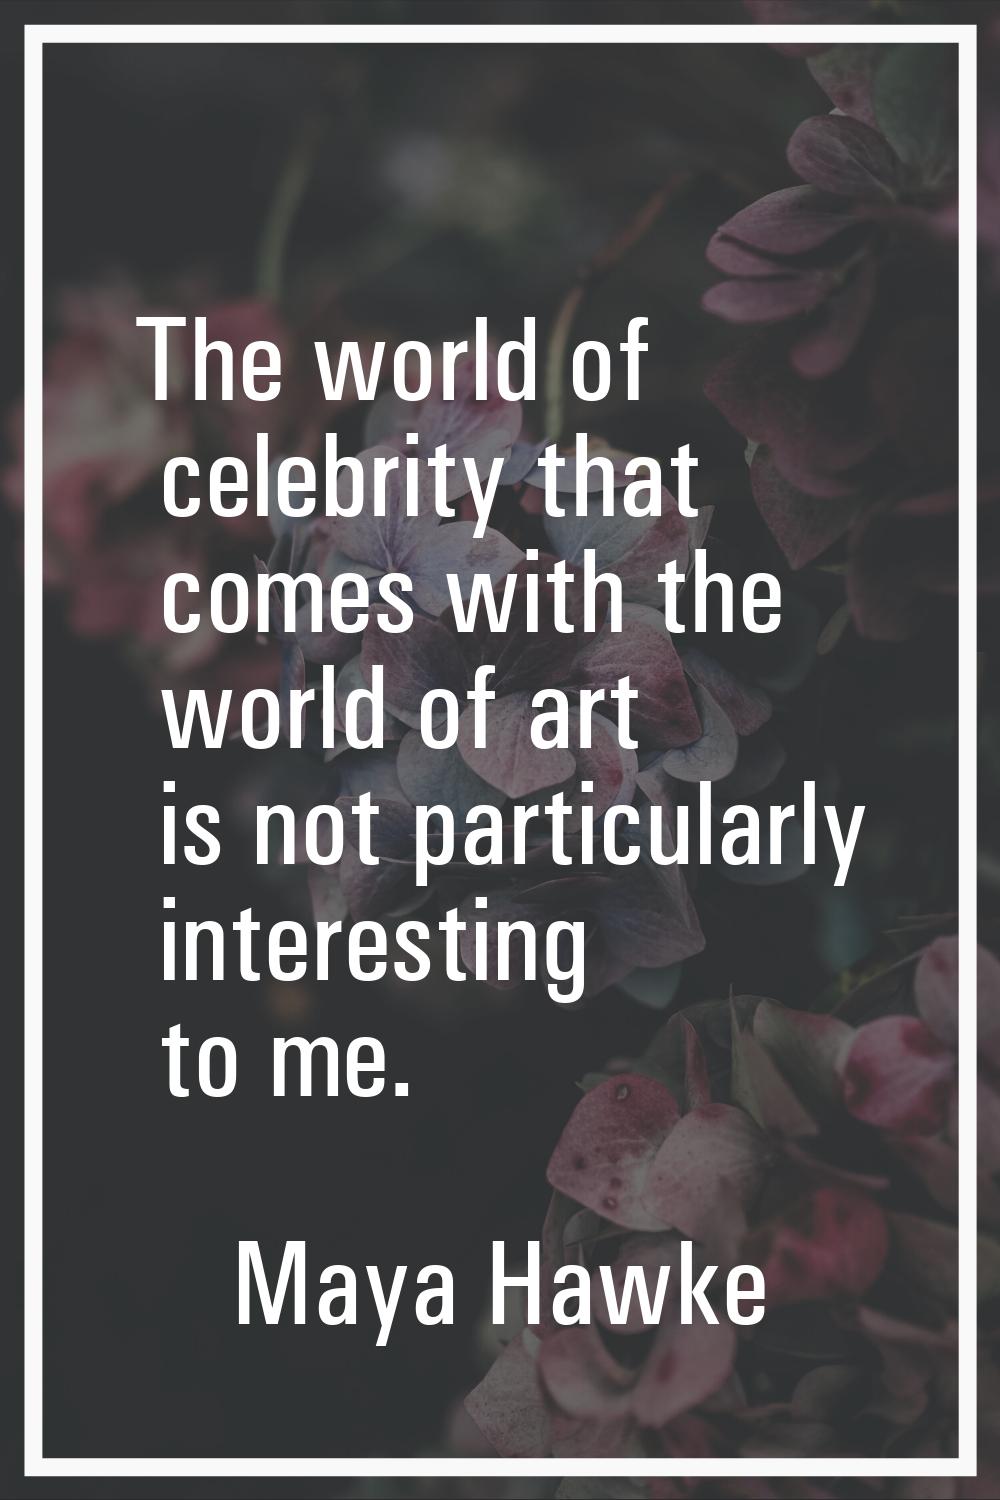 The world of celebrity that comes with the world of art is not particularly interesting to me.